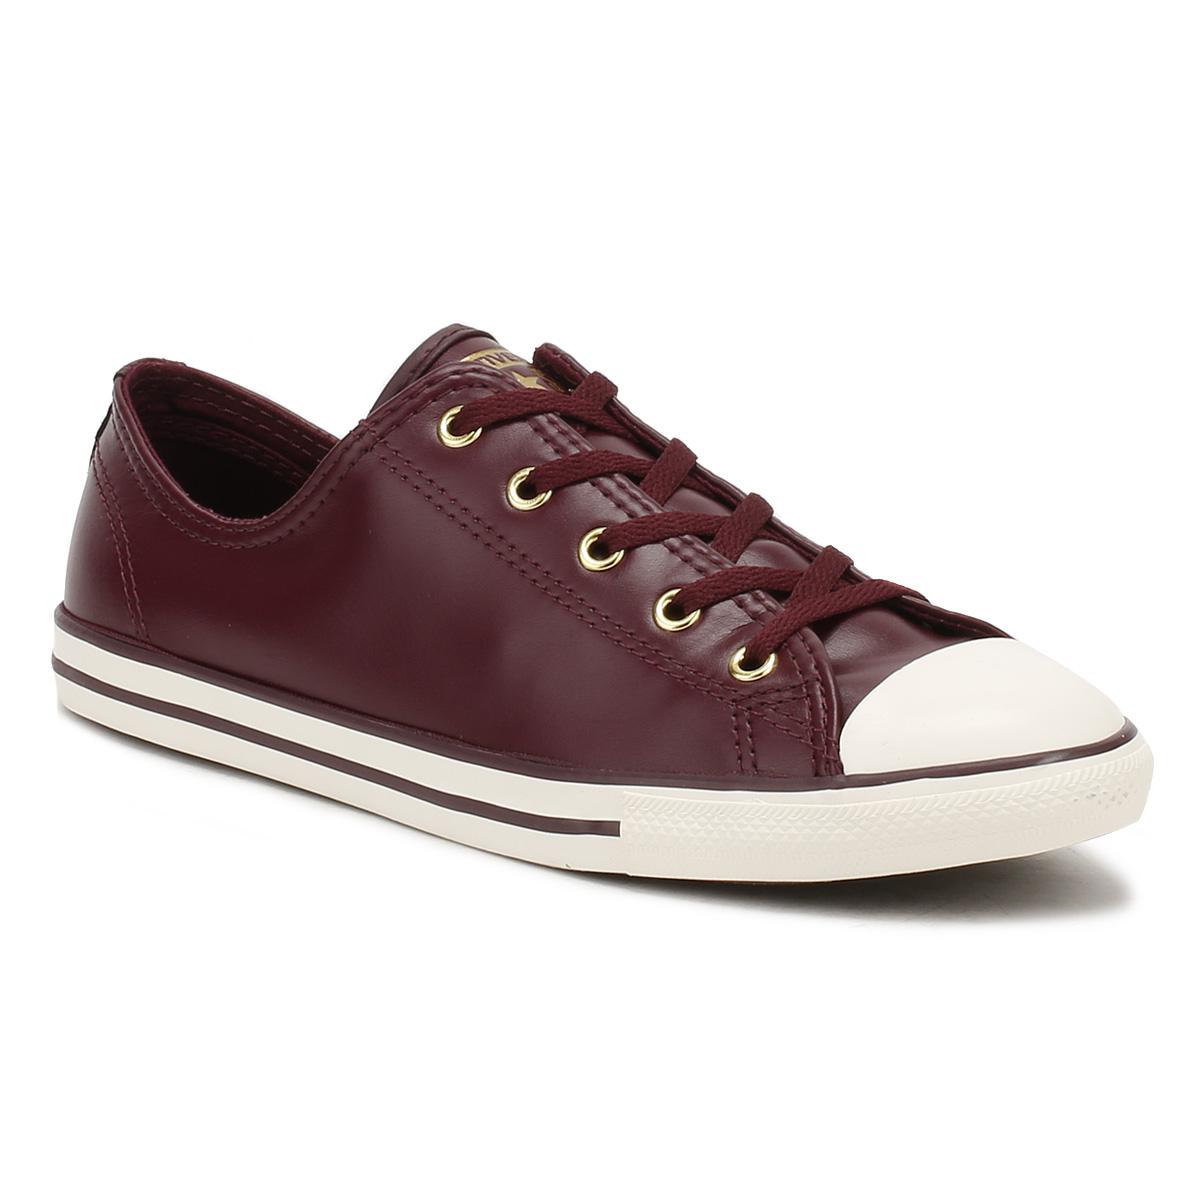 burgundy leather converse womens